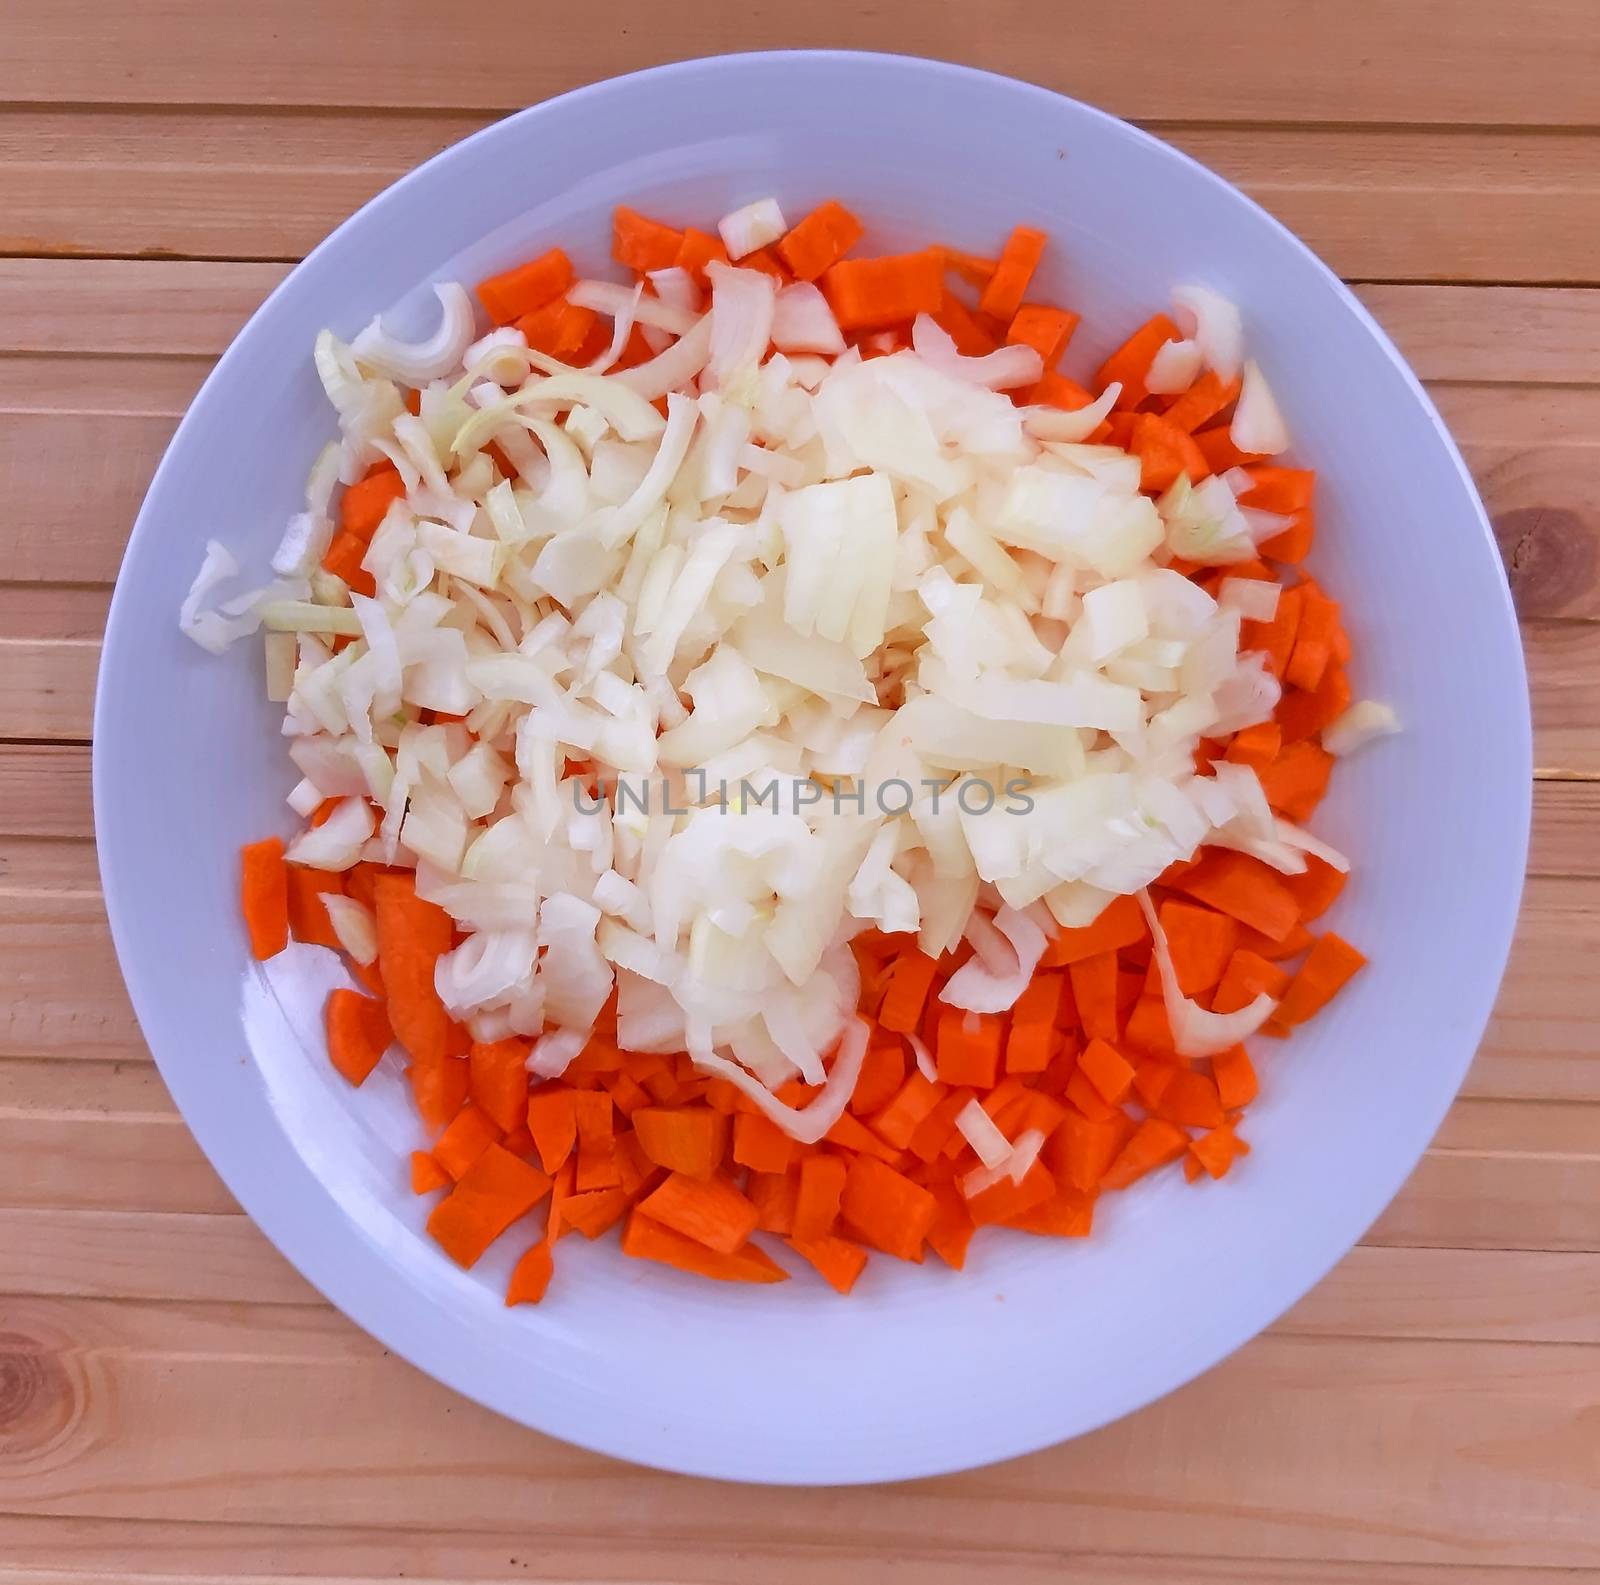 Onion and carrot cut into a plate by Mindru